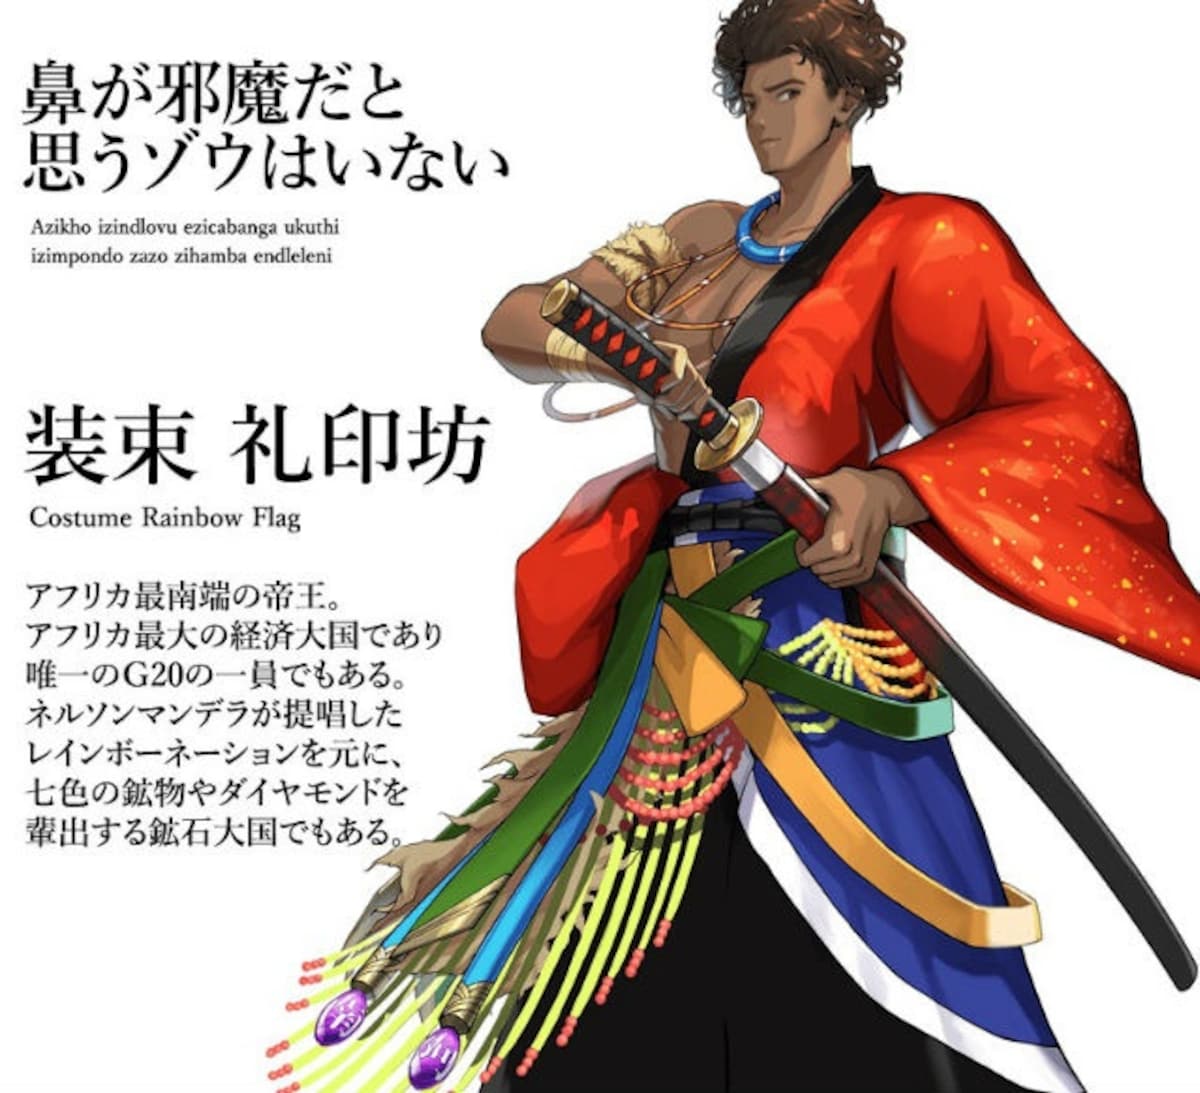 Countries turned into animated samurai by Japanese artists for  Olympics-Telangana Today